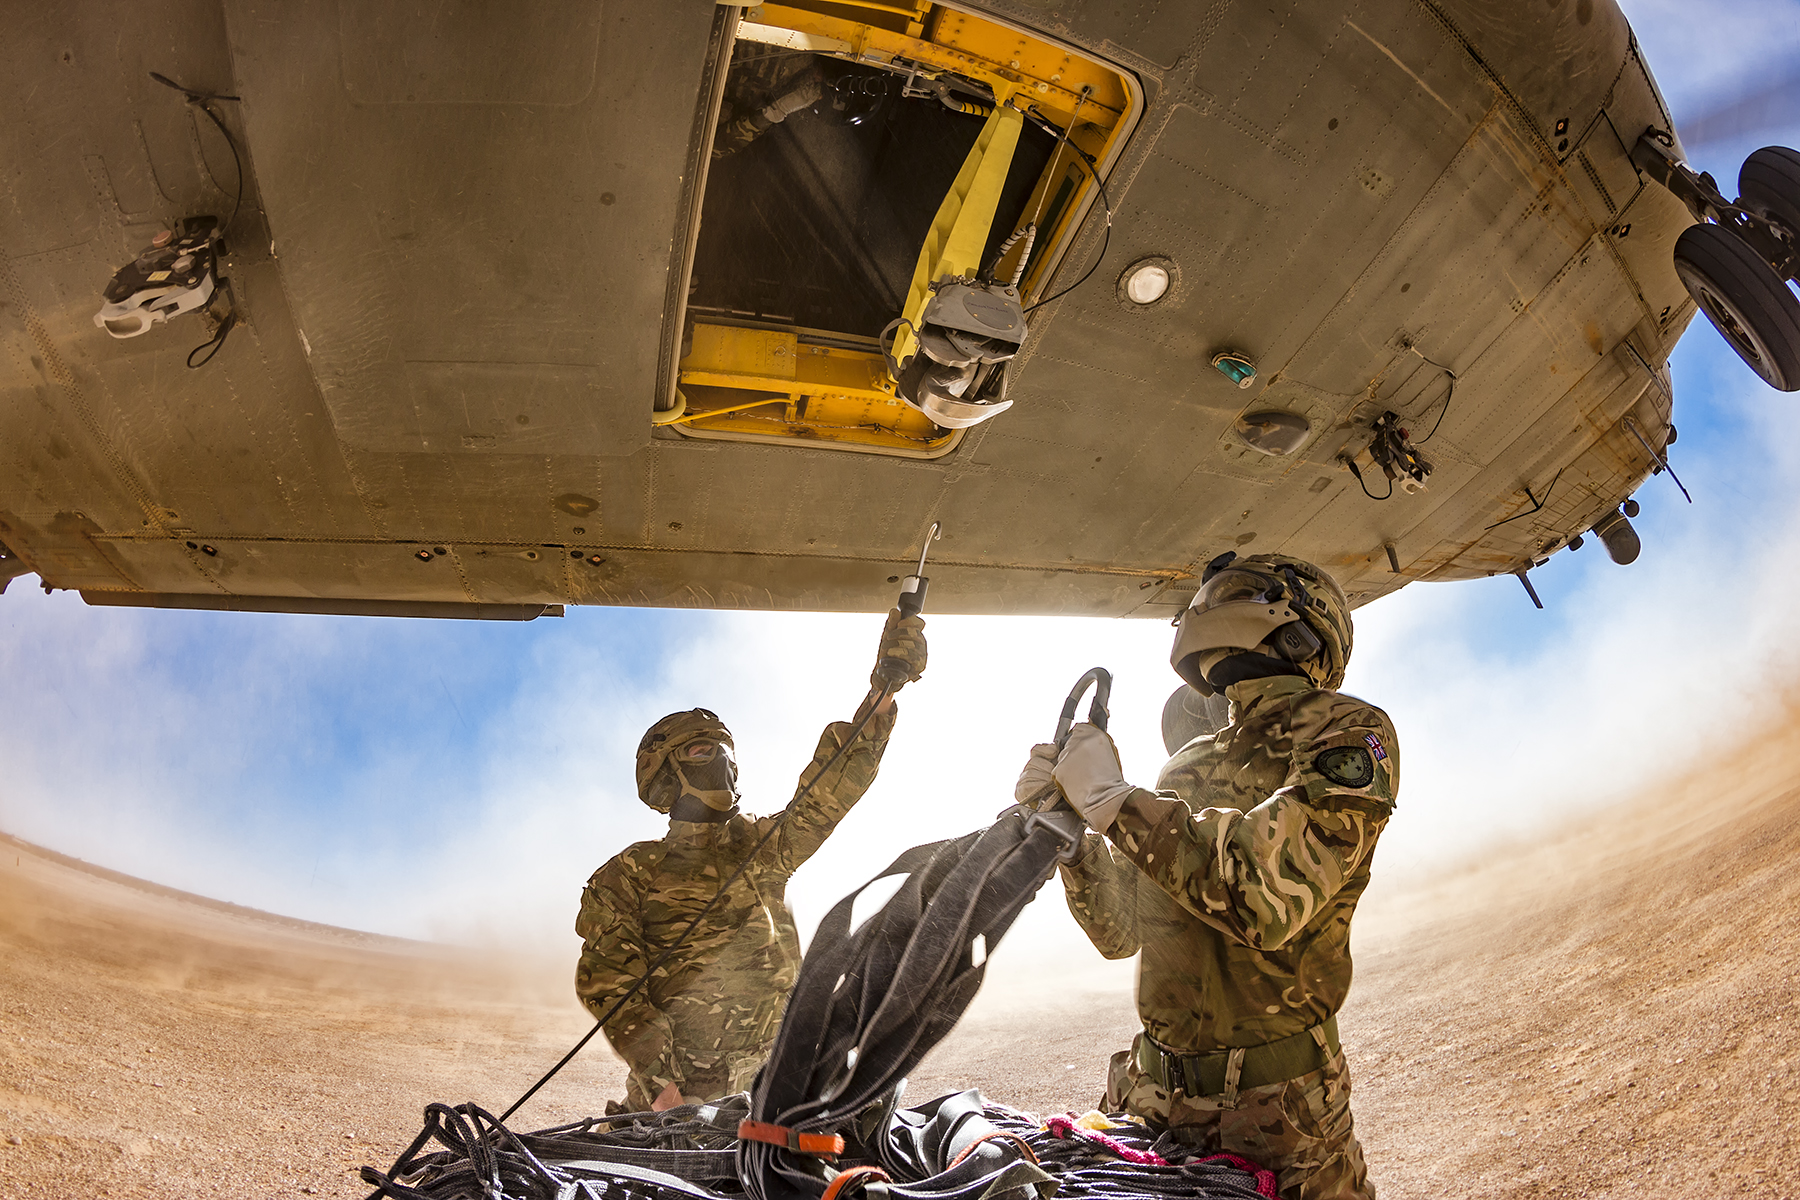 Image shows aviators attaching a load to the under-sling loads of a helicopter.